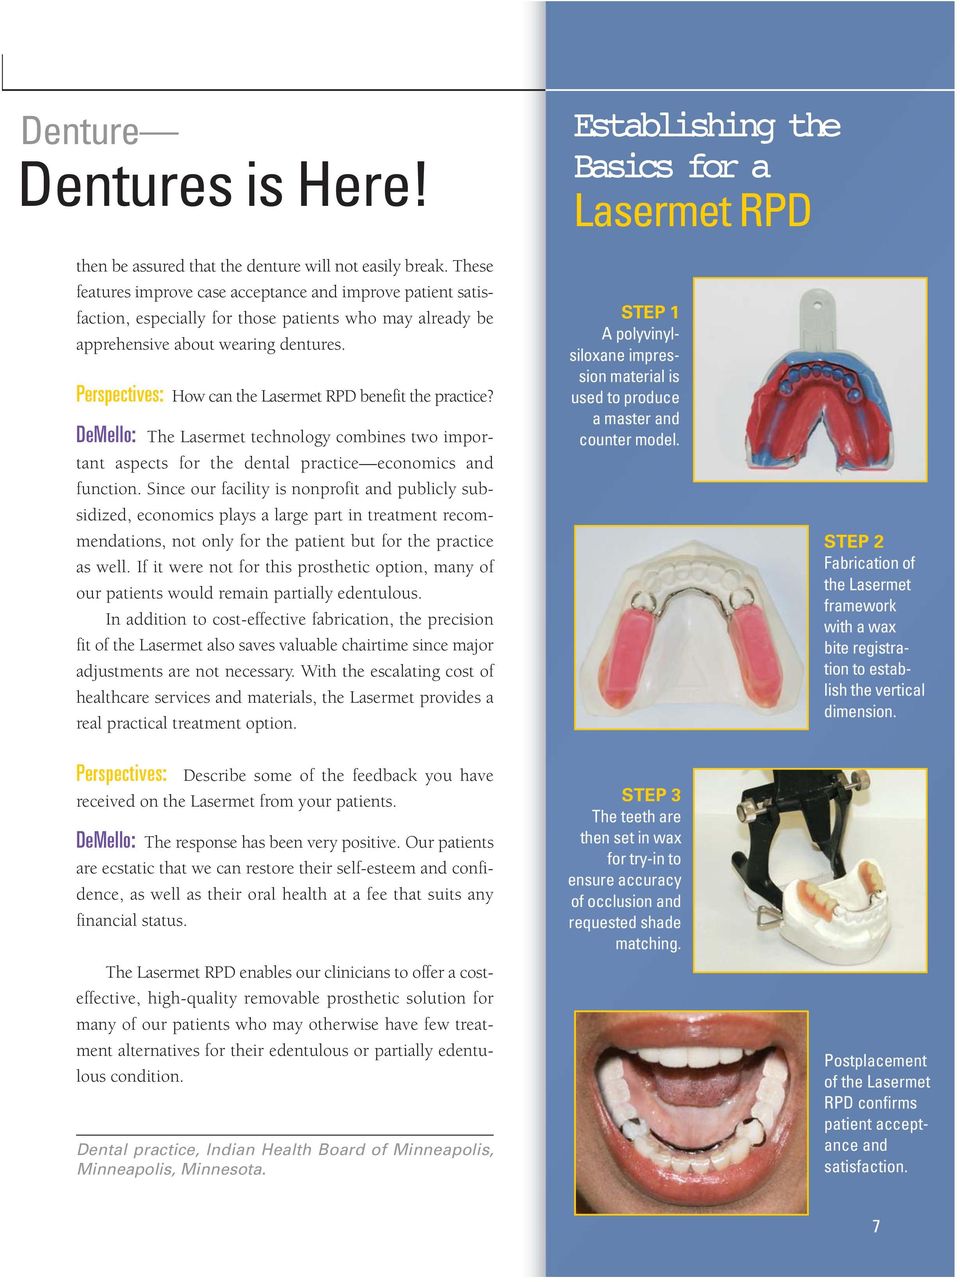 Perspectives: How can the Lasermet RPD benefit the practice? DeMello: The Lasermet technology combines two important aspects for the dental practice economics and function.